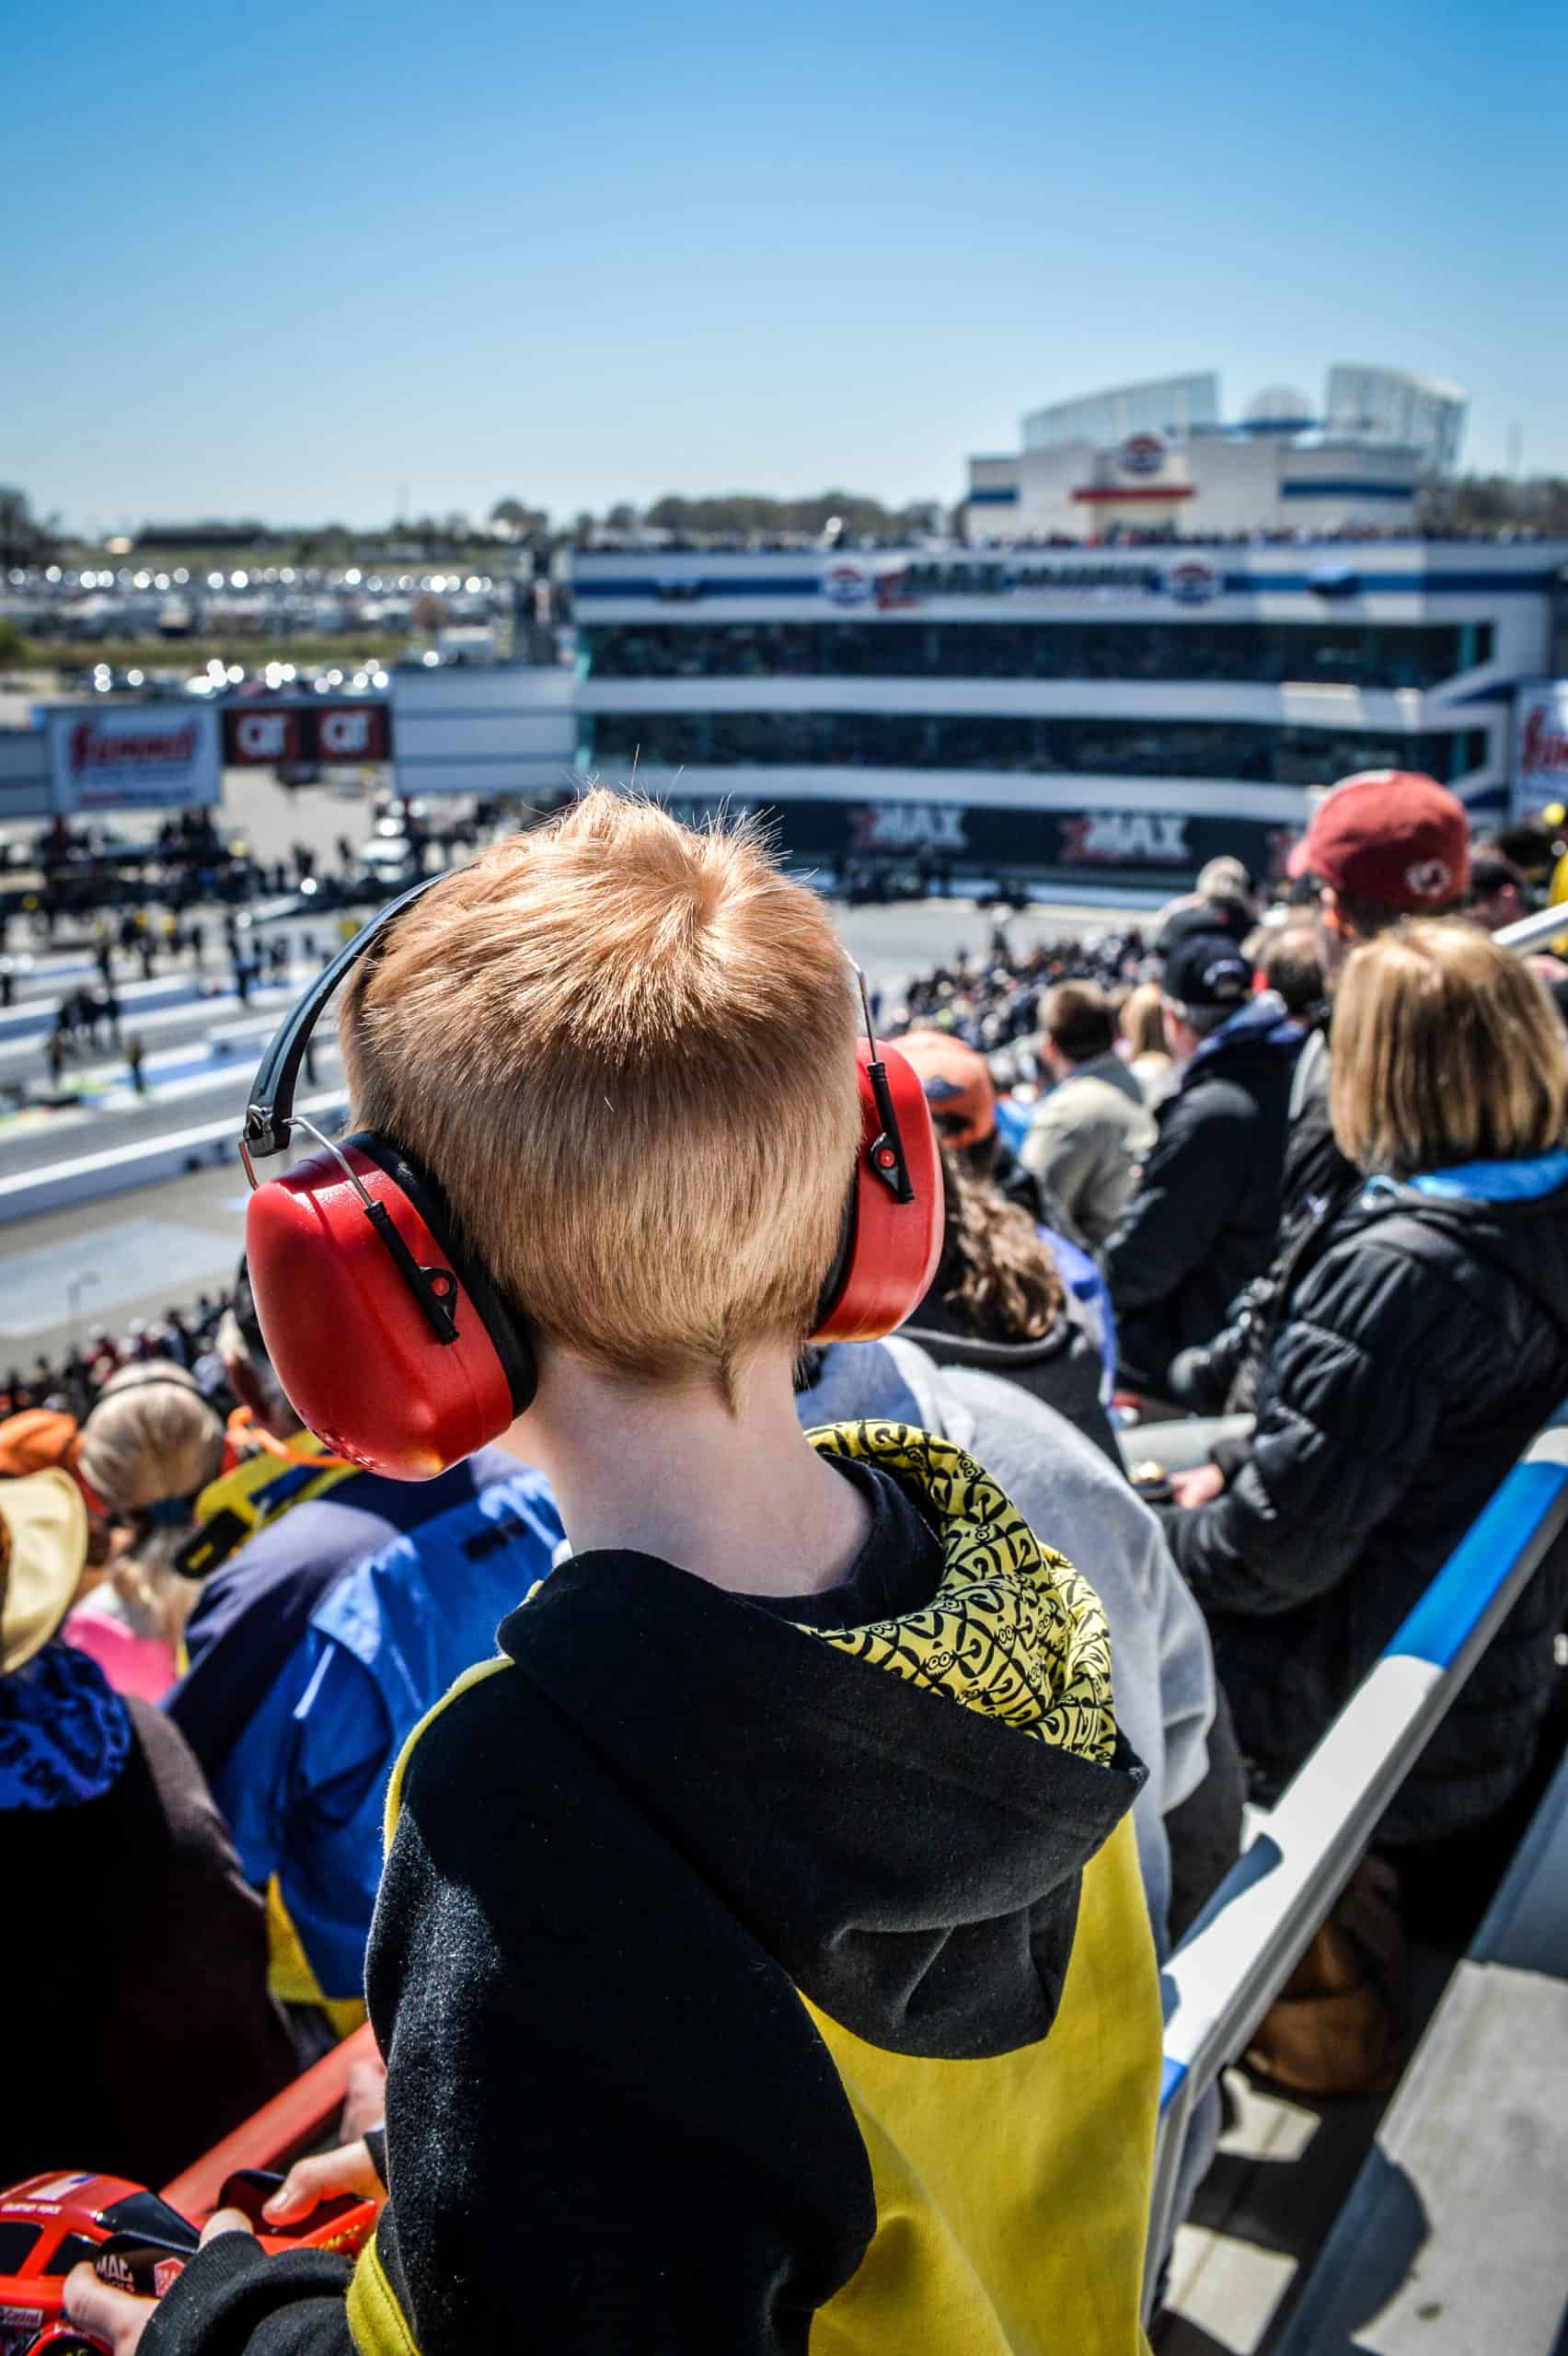 Young race fan with ear protection on enjoys drag racing at zMAX Dragway